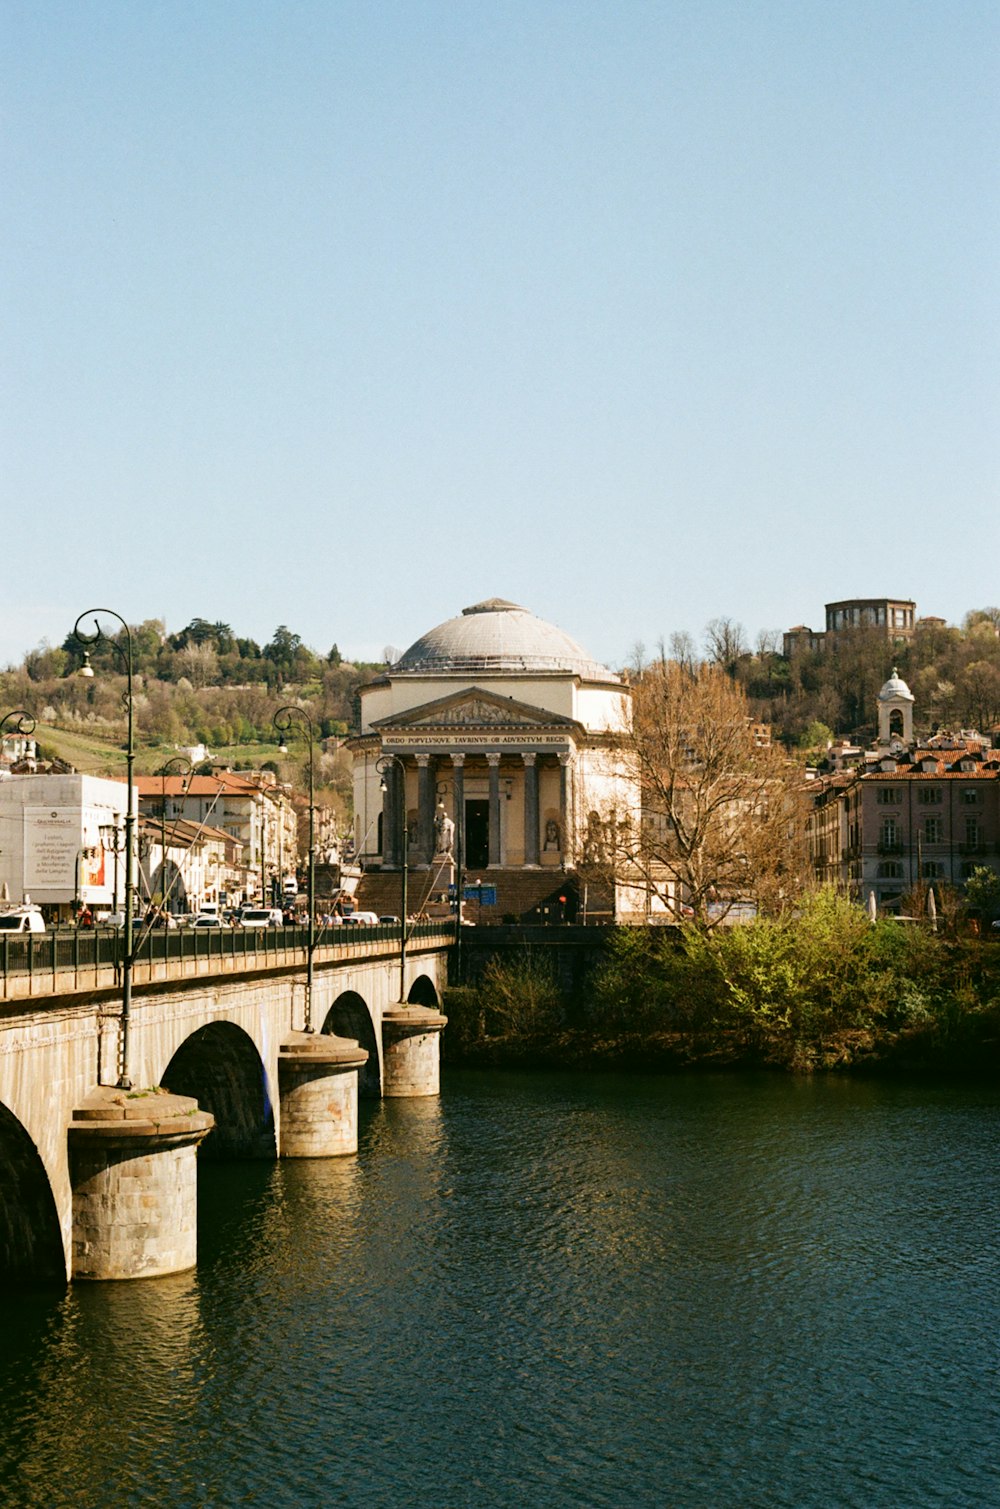 a bridge over a body of water with a building in the background